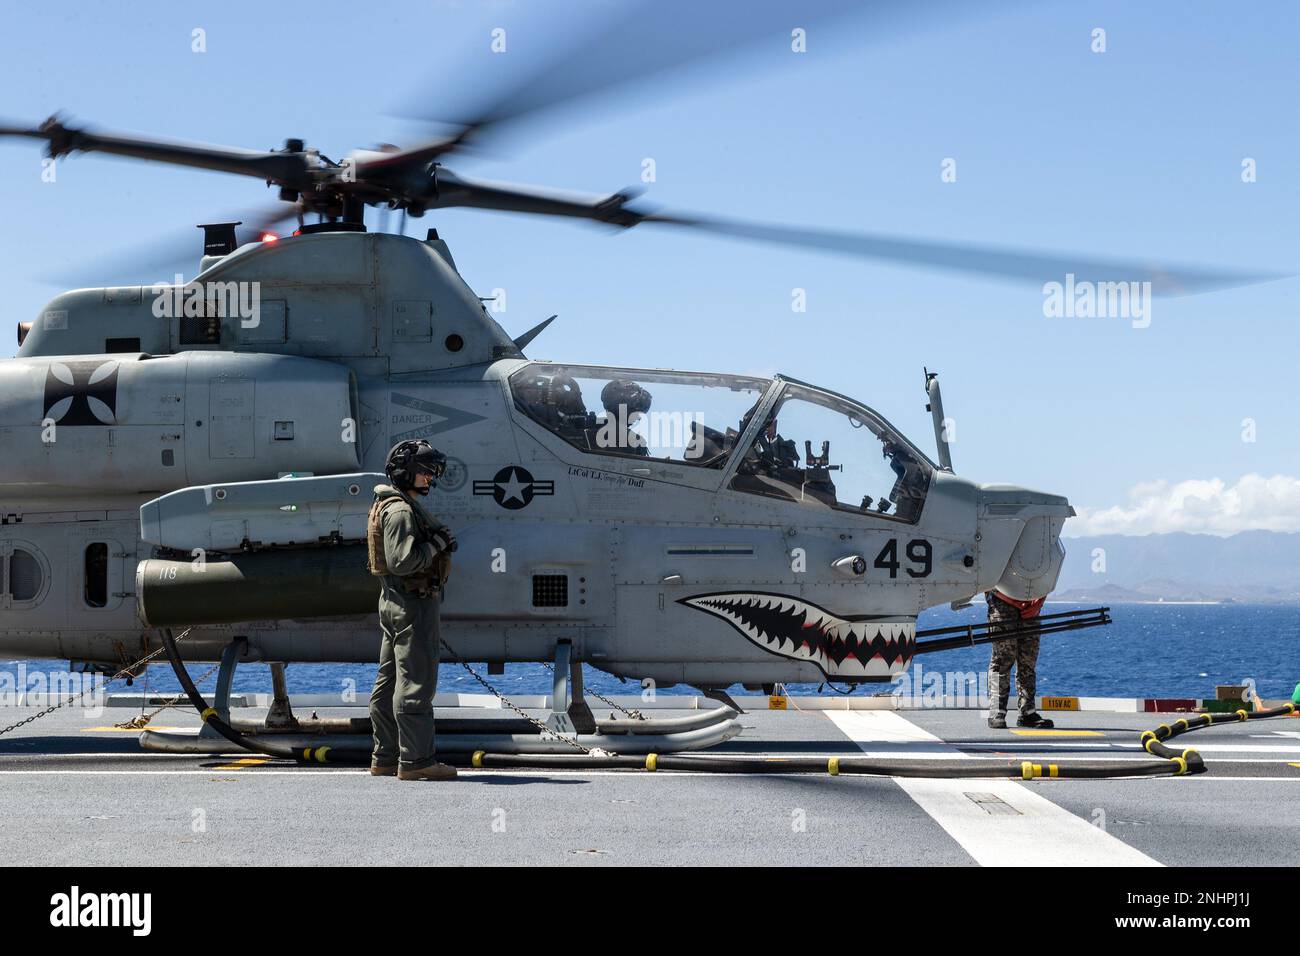 PACIFIC OCEAN (Aug. 1, 2022) A U.S. Marine Corps AH-1Z Viper helicopter refuels on the flight deck of Royal Australian Navy Canberra-class landing helicopter dock HMAS Canberra (L02) during Rim of the Pacific (RIMPAC) 2022. Twenty-six nations, 38 ships, three submarines, more than 170 aircraft and 25,000 personnel are participating in RIMPAC from June 29 to Aug. 4 in and around the Hawaiian Islands and Southern California. The world's largest international maritime exercise, RIMPAC provides a unique training opportunity while fostering and sustaining cooperative relationships among participant Stock Photo